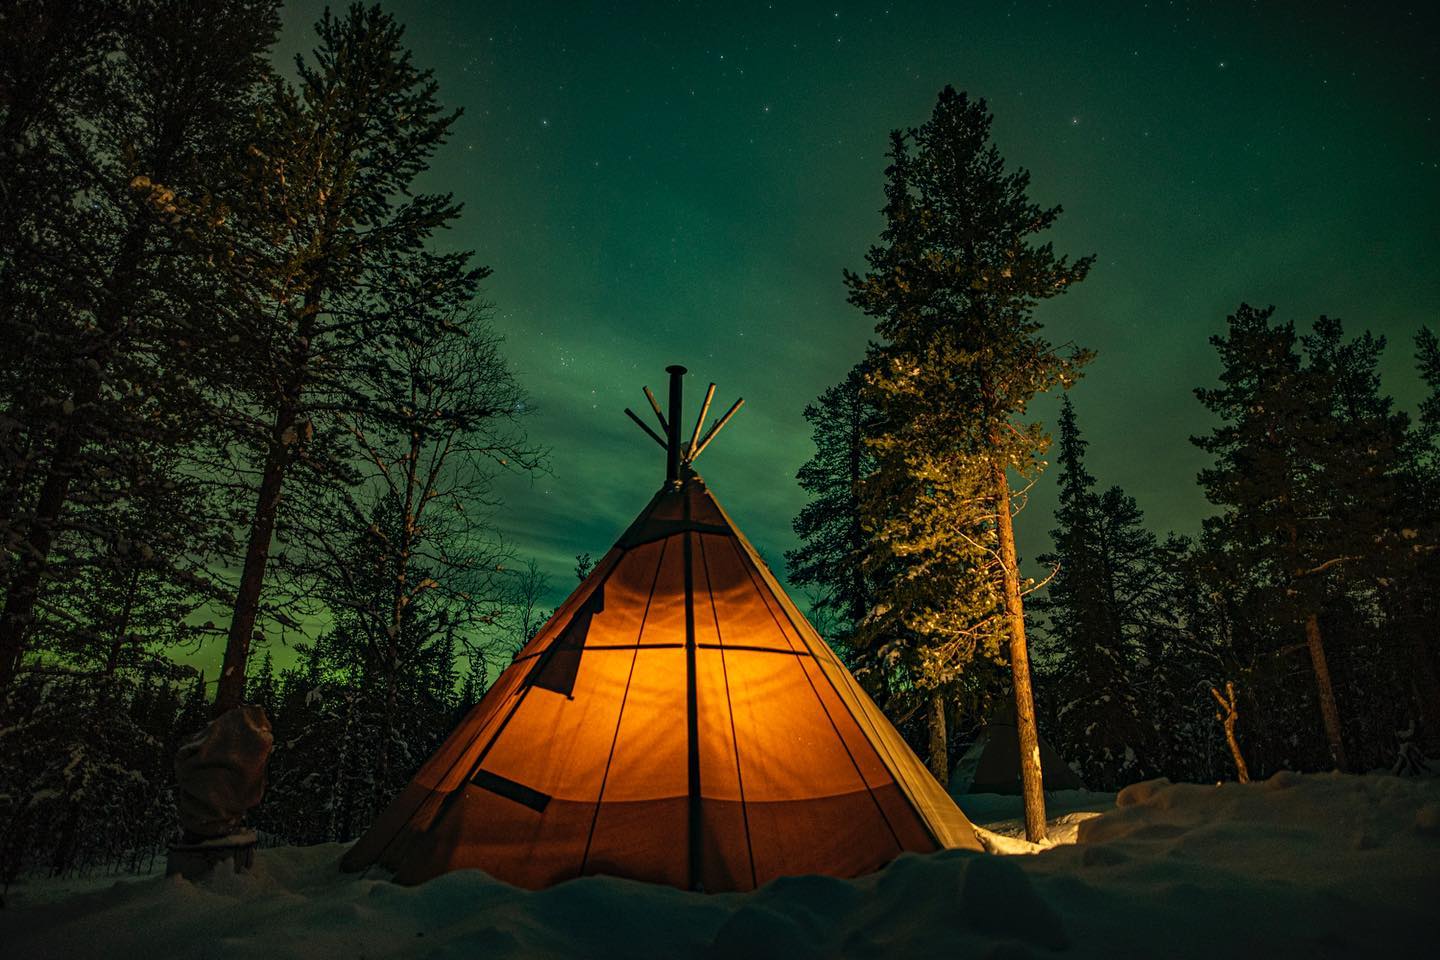 Off the Map has created a unique new itinerary that combined glamping with a chance to delve into the culture and traditions of Sweden's Sami people.